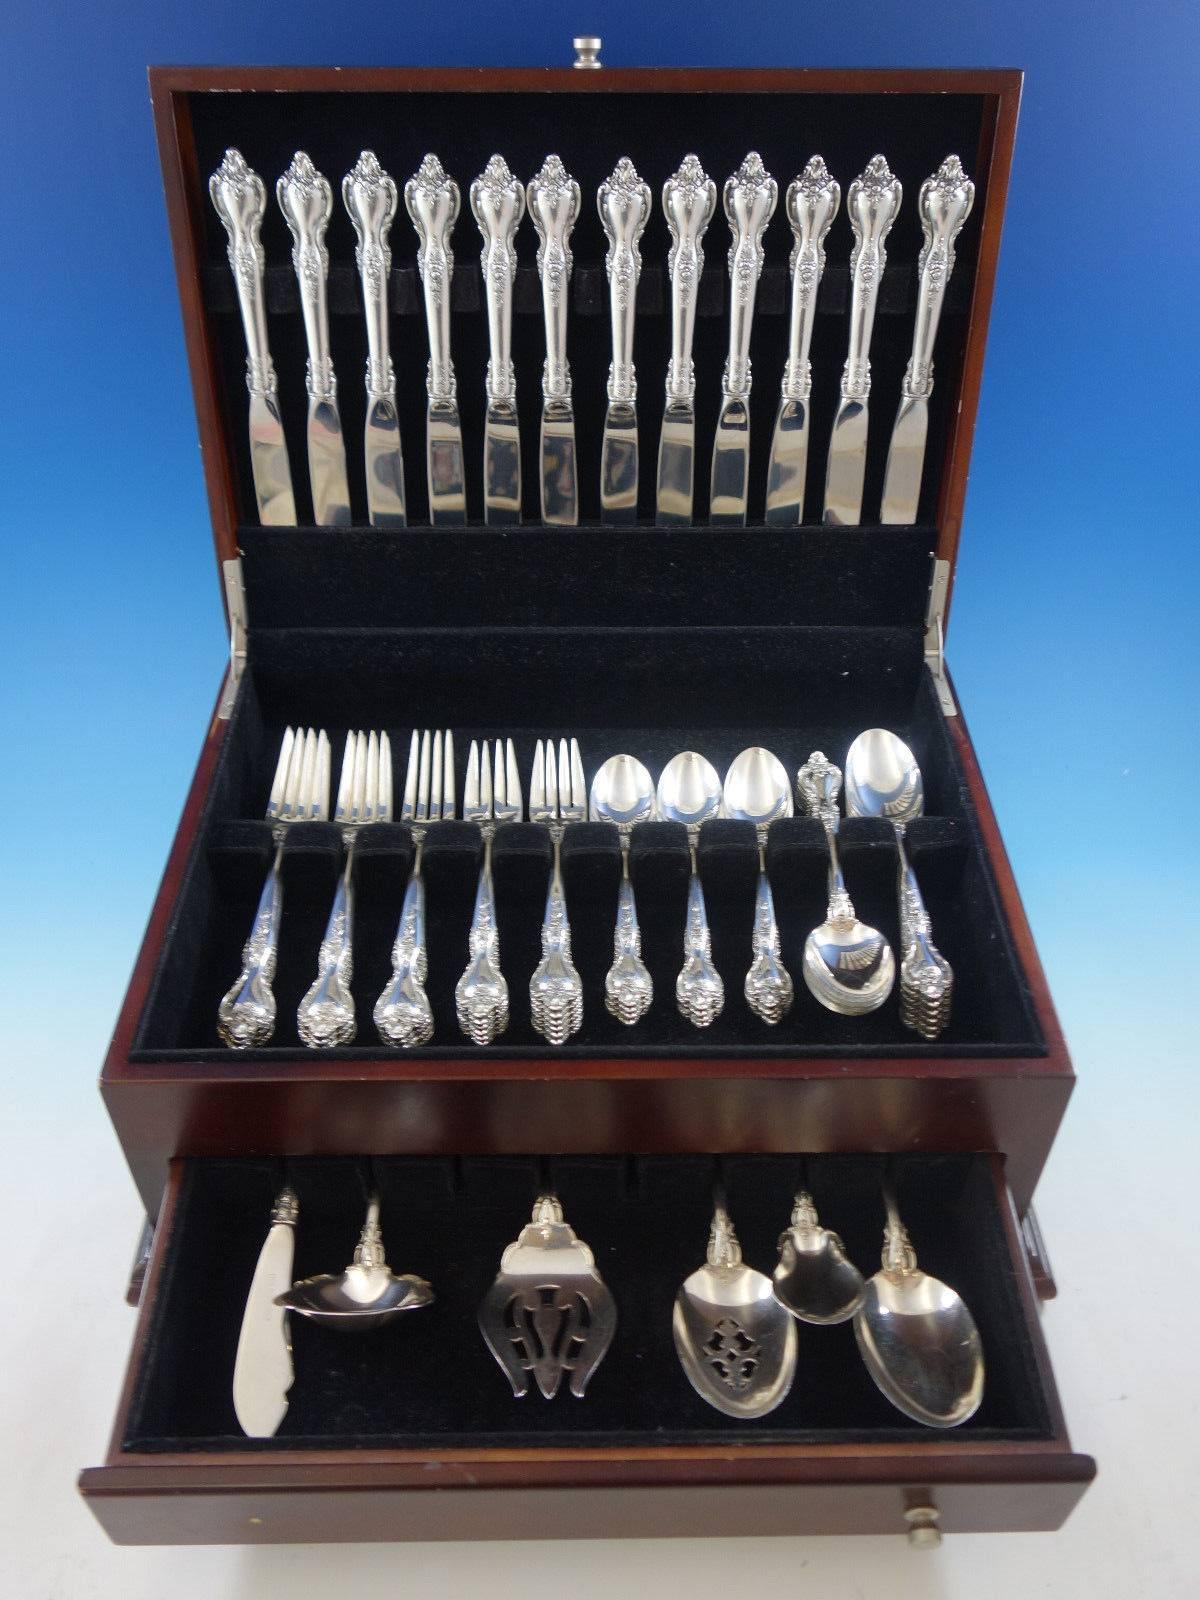 Delacourt by Lunt sterling silver flatware set, 66 pieces. This set includes: 12 knives, 9 1/8